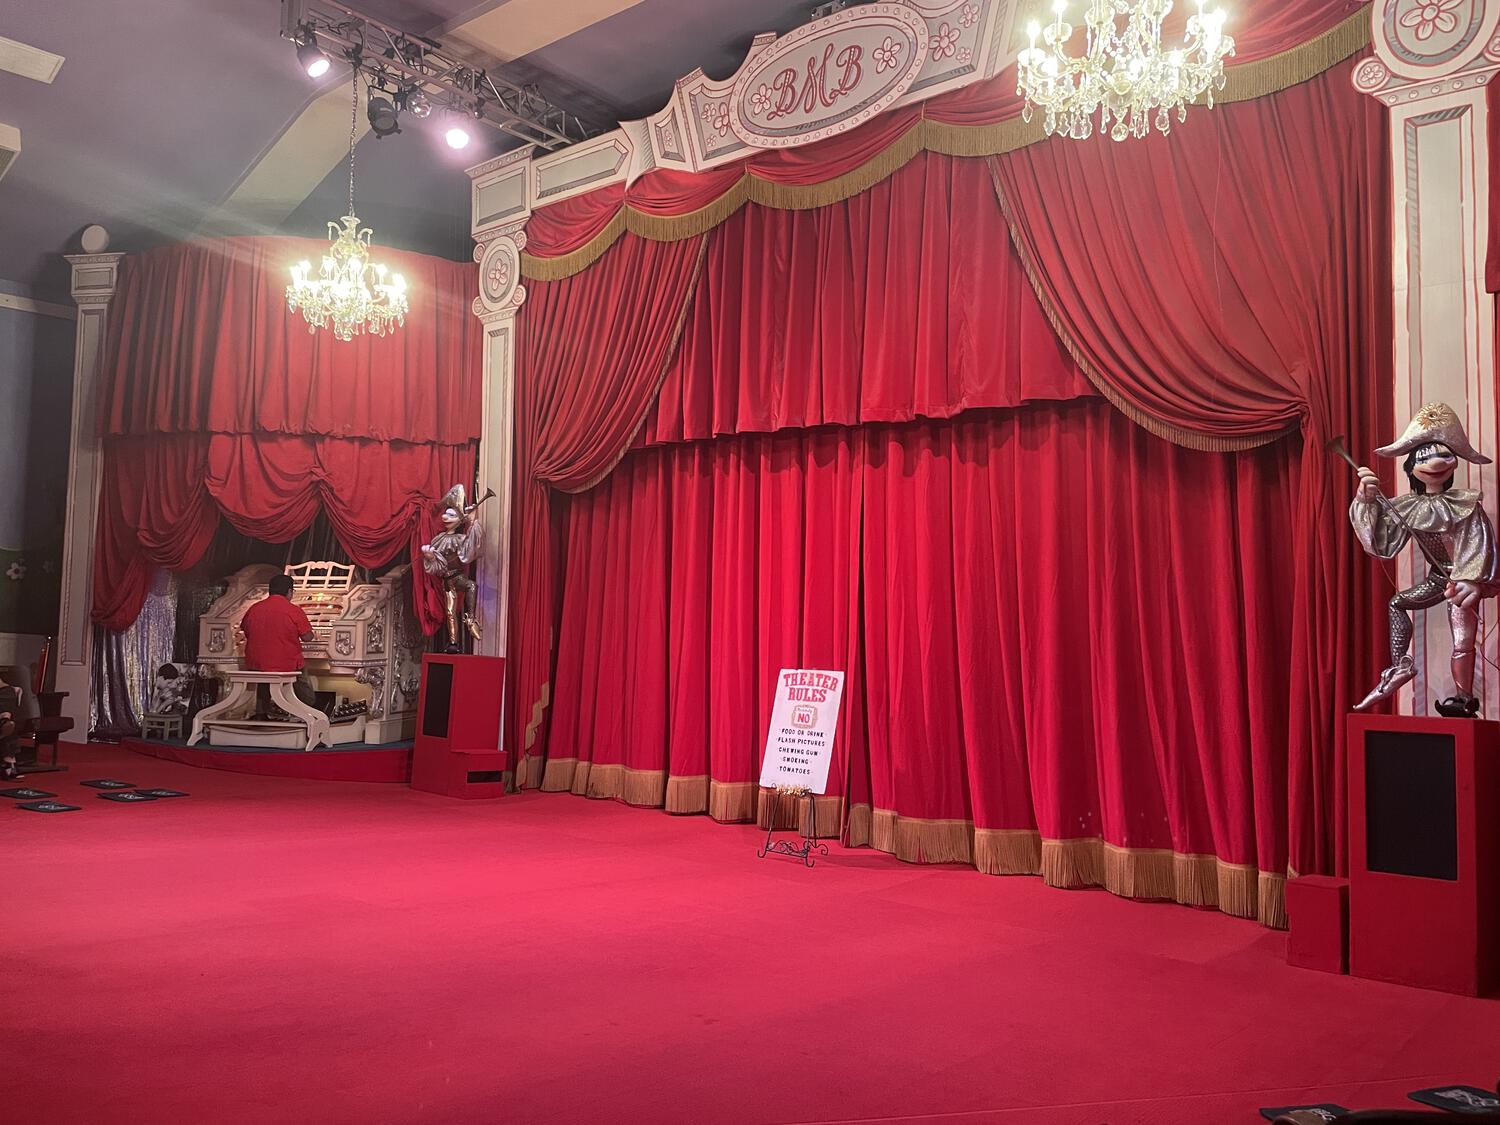 A closed red curtain in a small but finely-decorated theater. An organist plays in the background.